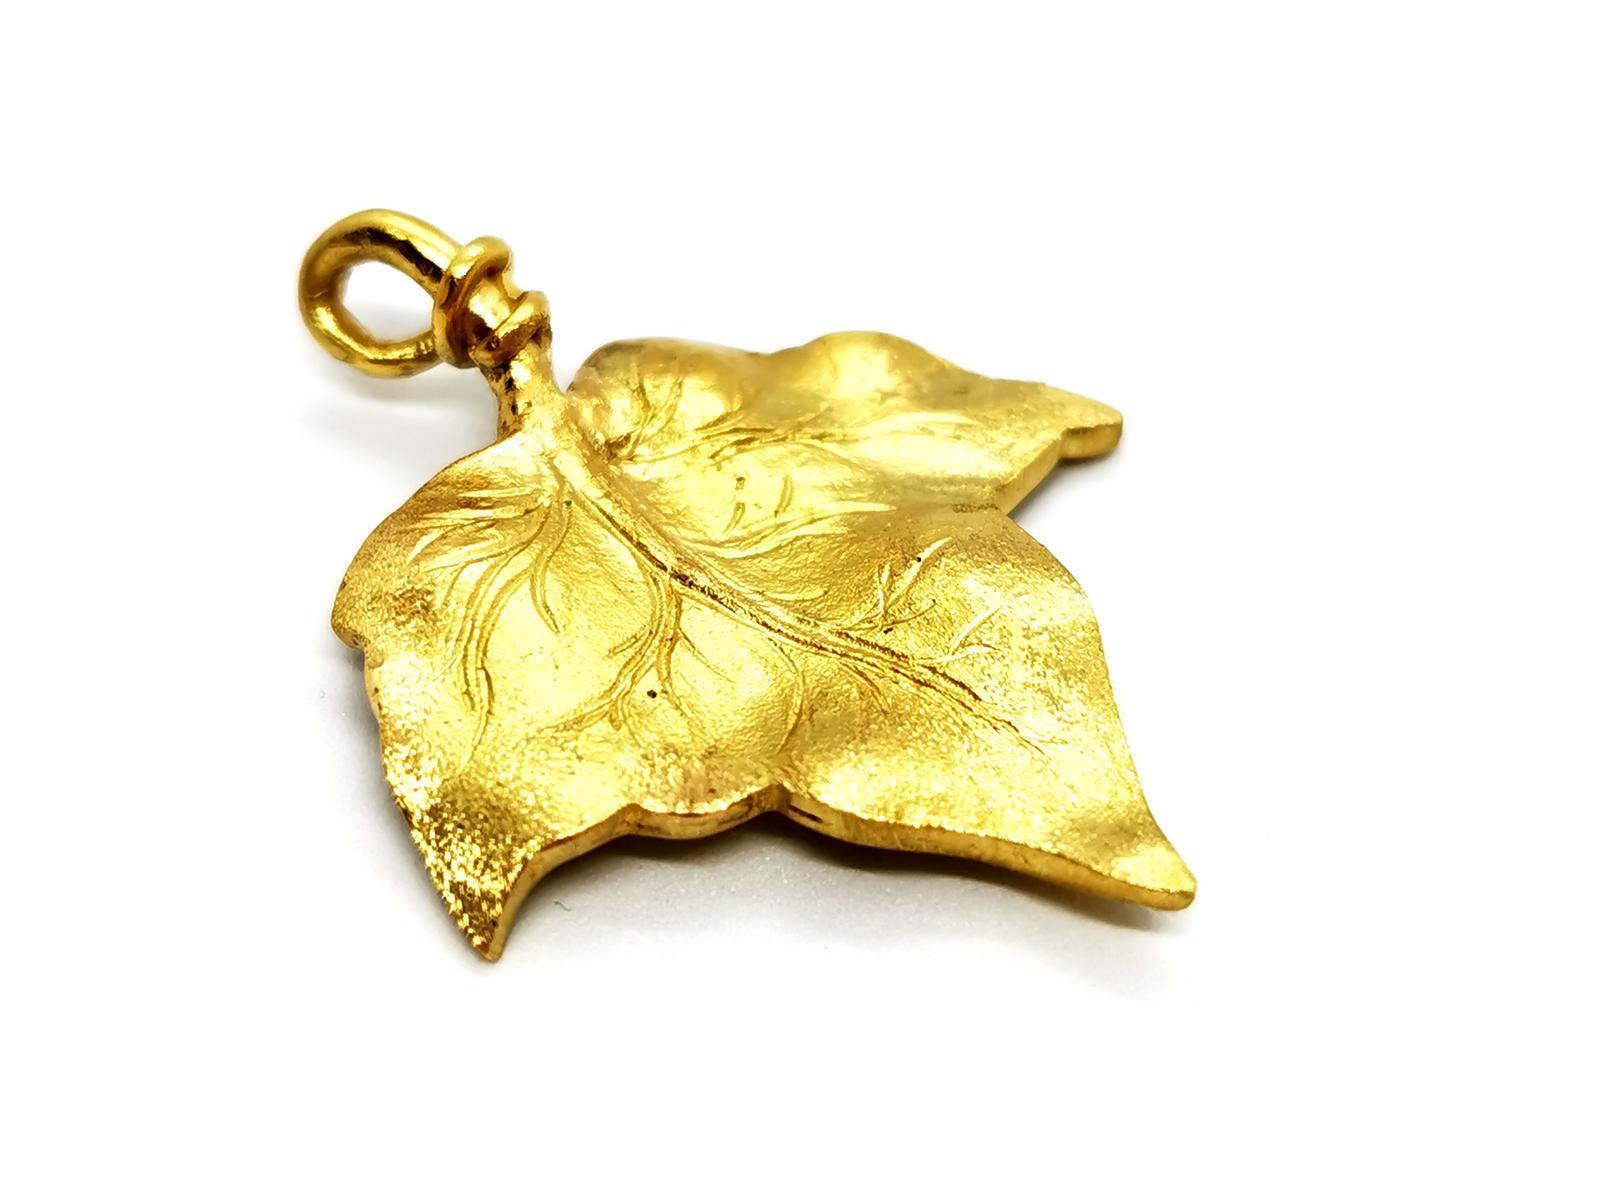 Pendant in 750 thousandths (18k) yellow gold. leaf motif. brushed finish on top. matt on reverse. dimensions (including bail): 4.23 cm X 3.43 cm. Peppino Capuano signature on the back. total weight : 15.03 g. Owl head hallmark. excellent condition.
